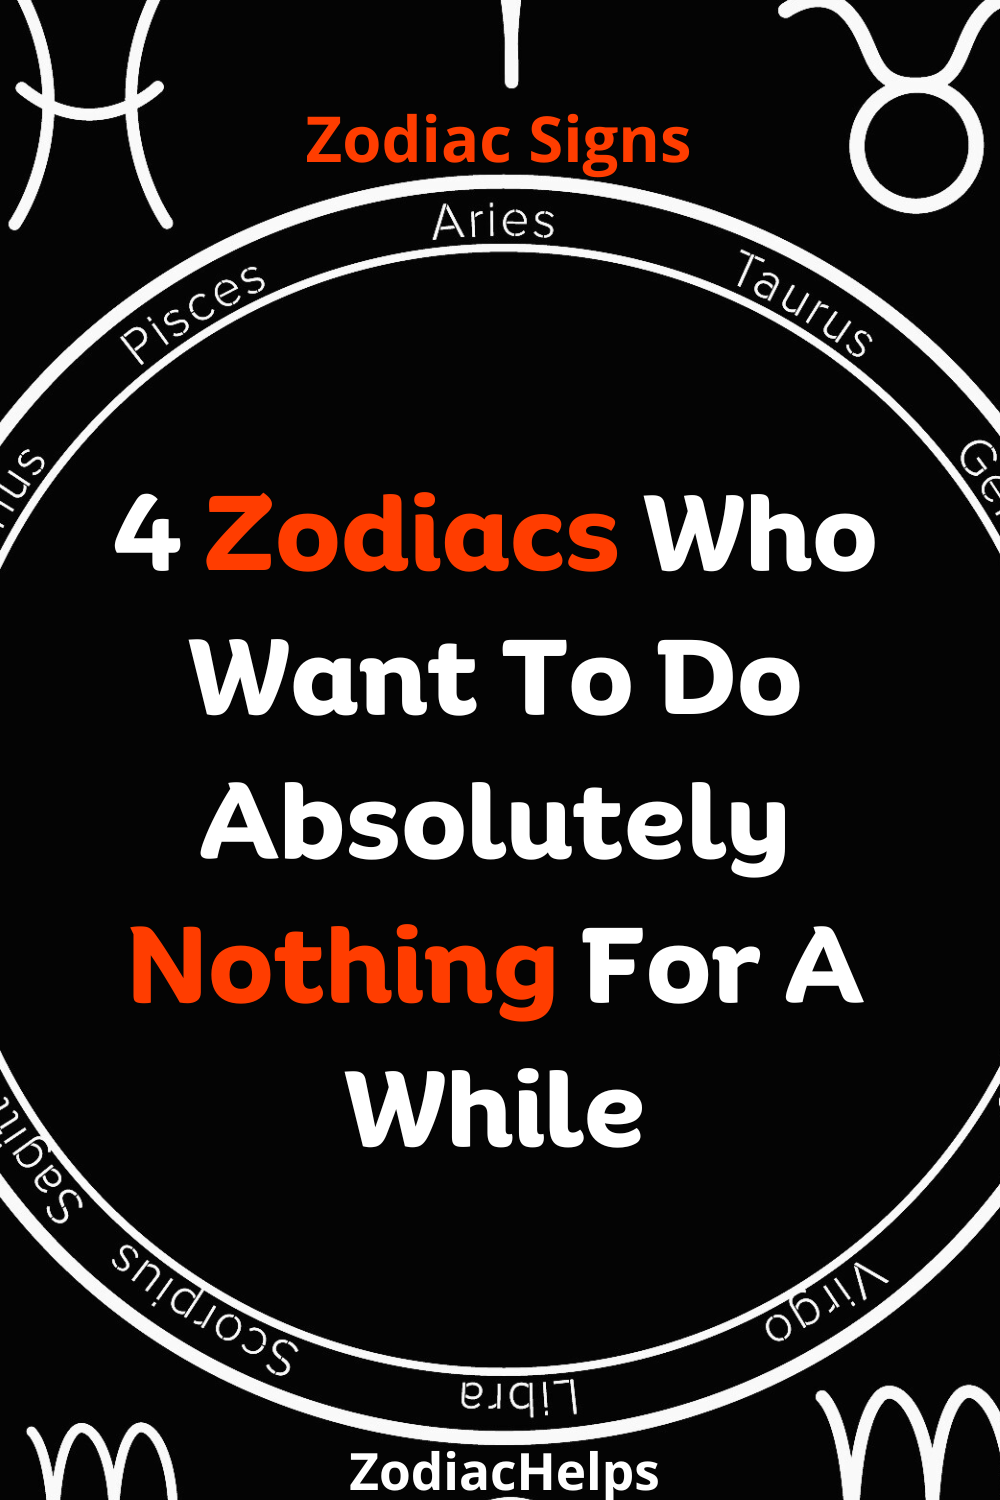 4 Zodiacs Who Want To Do Absolutely Nothing For A While